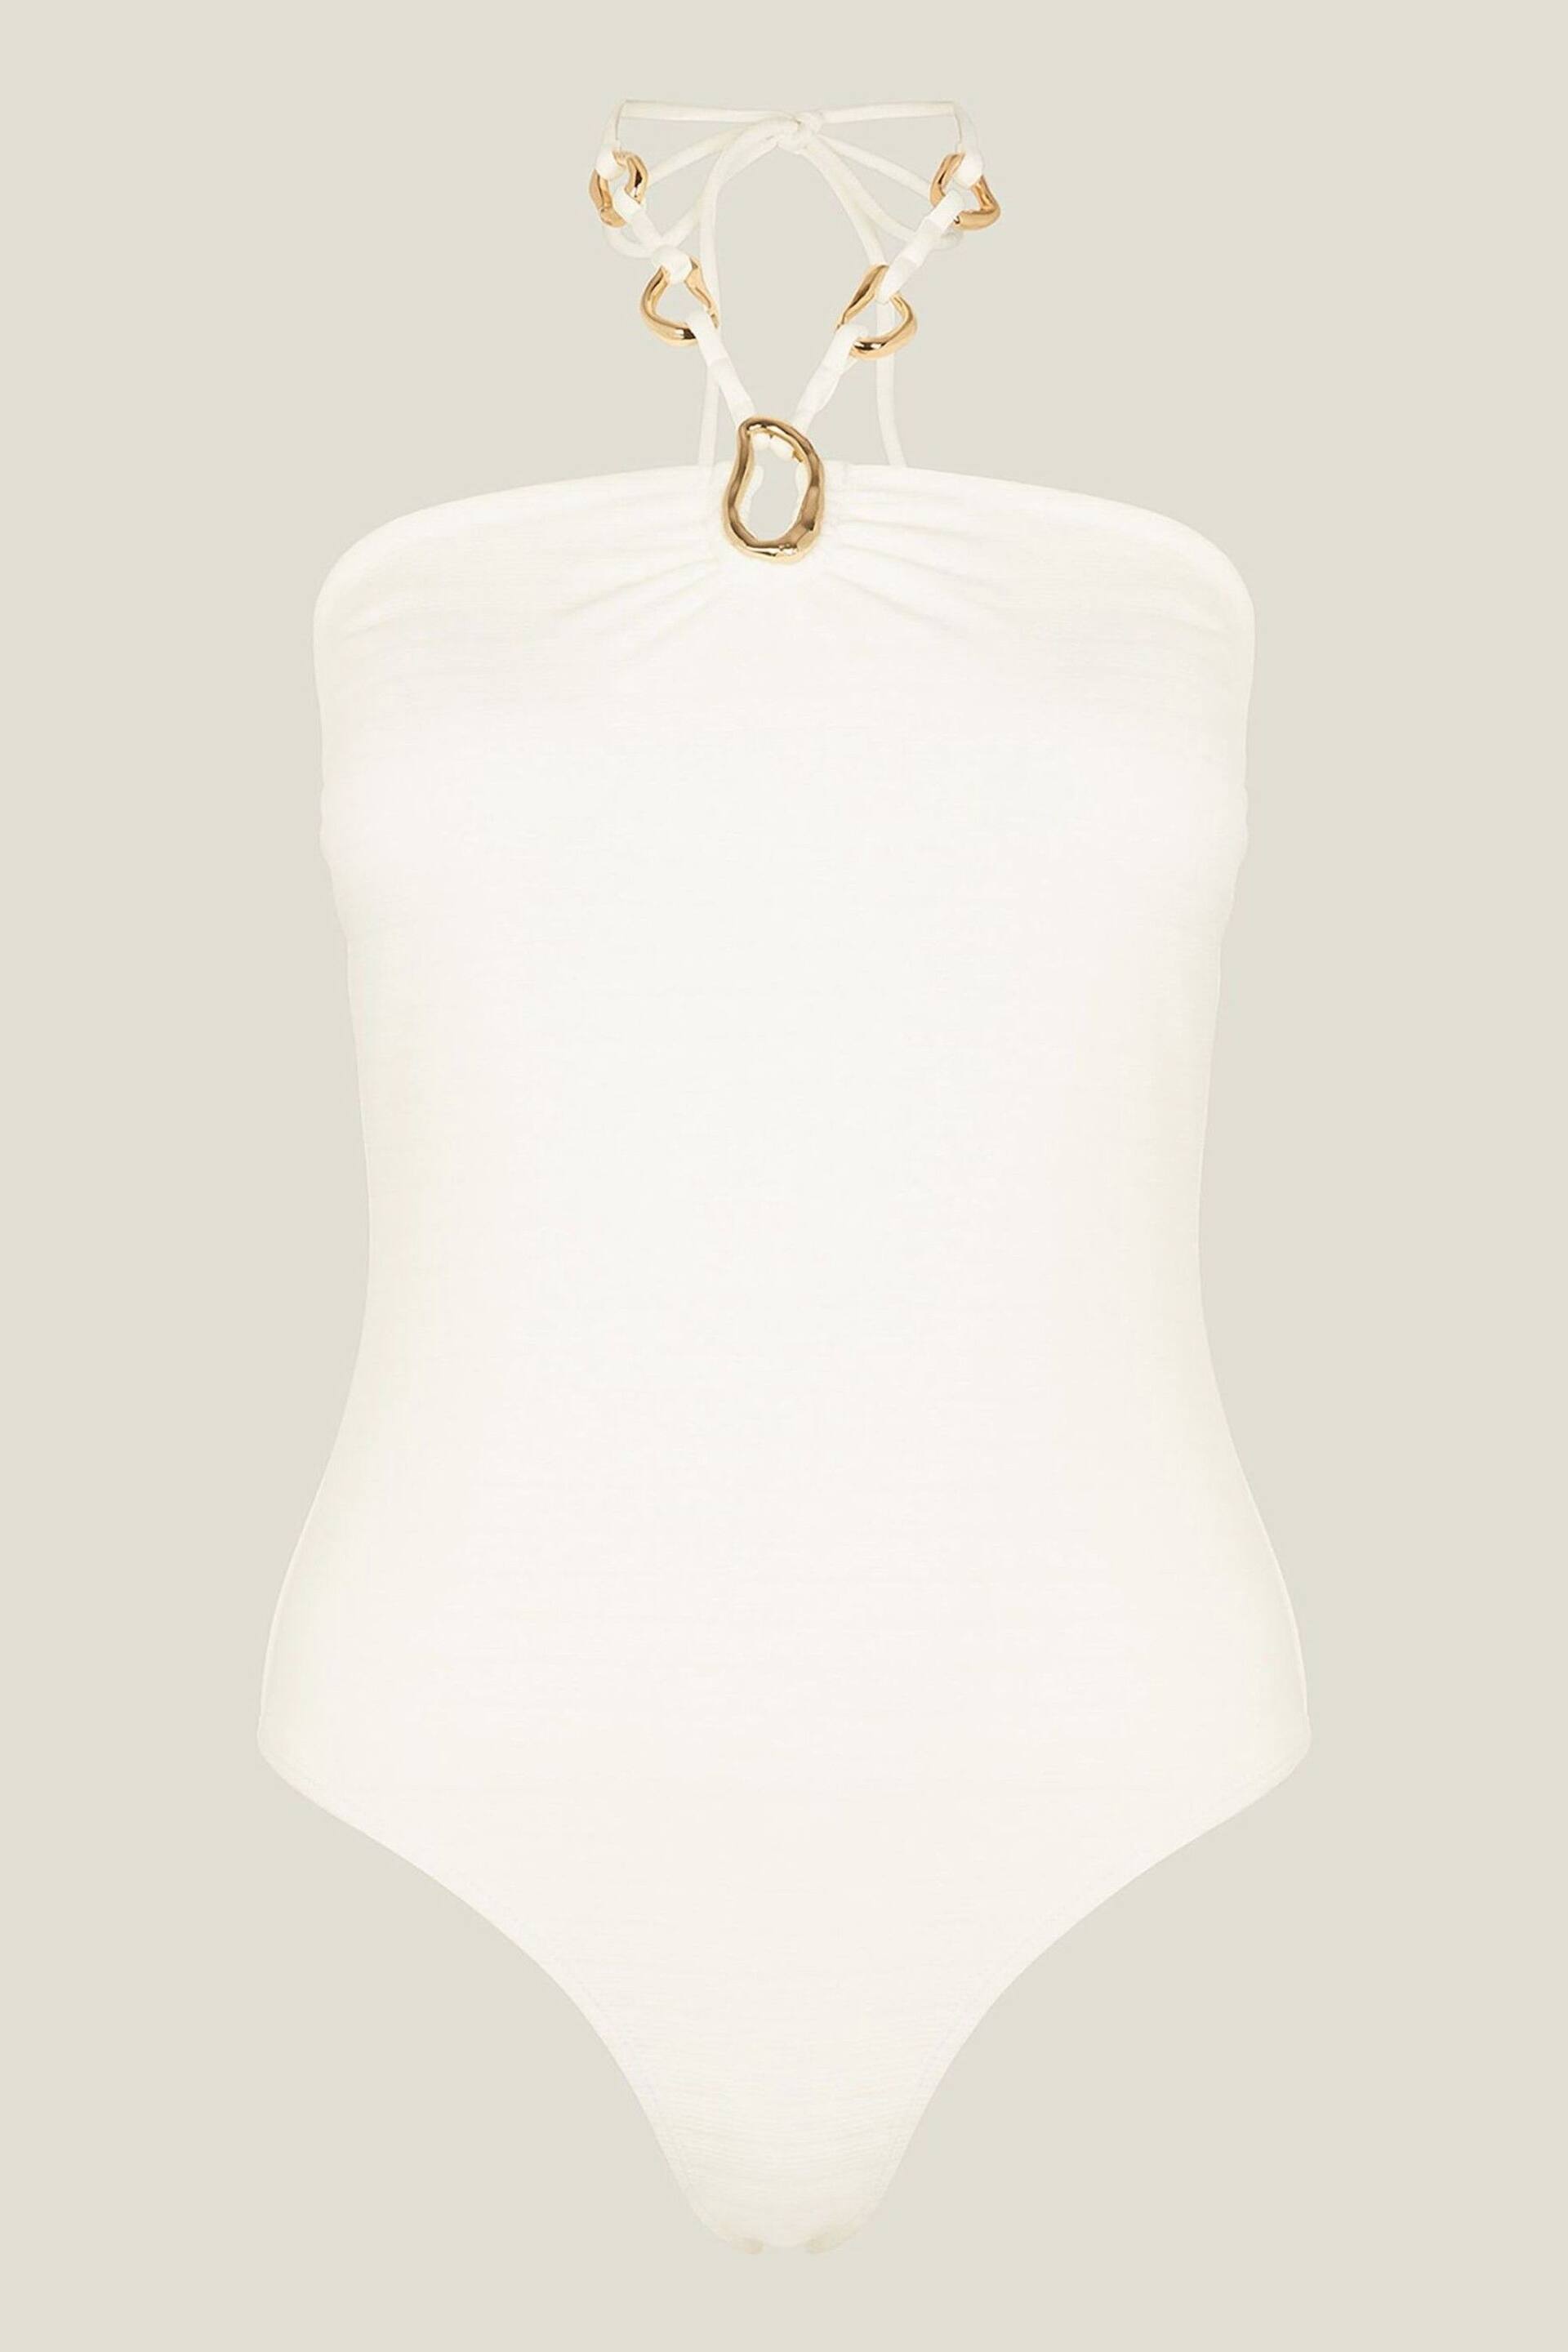 Accessorize White Ring Halter Neck Swimsuit - Image 3 of 3